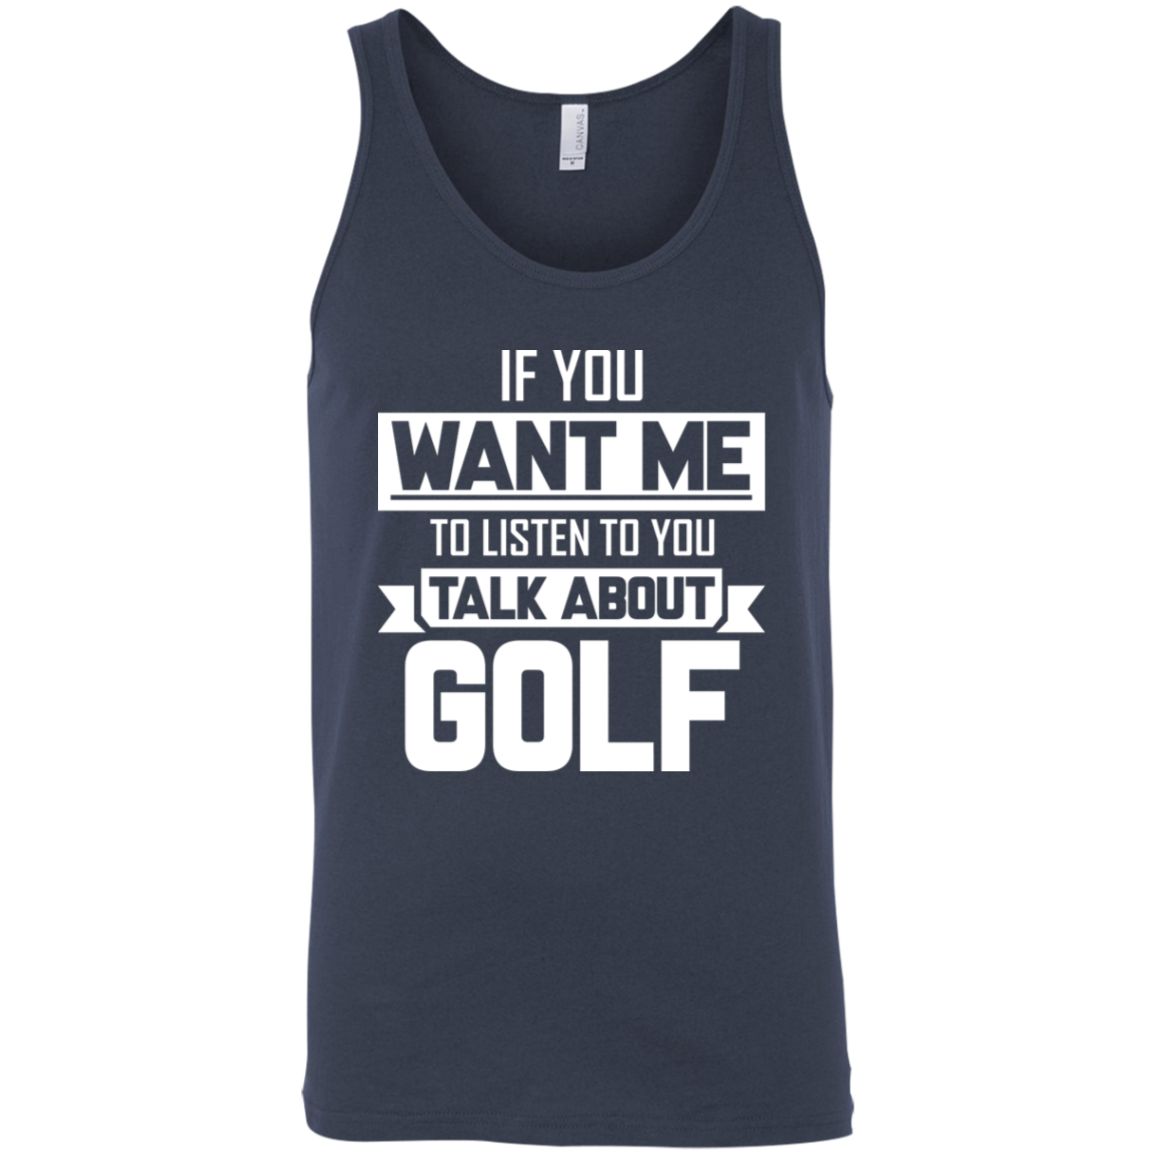 If You Want Me To Listen To You Talk About Golf Tank Top Apparel - The Beer Lodge